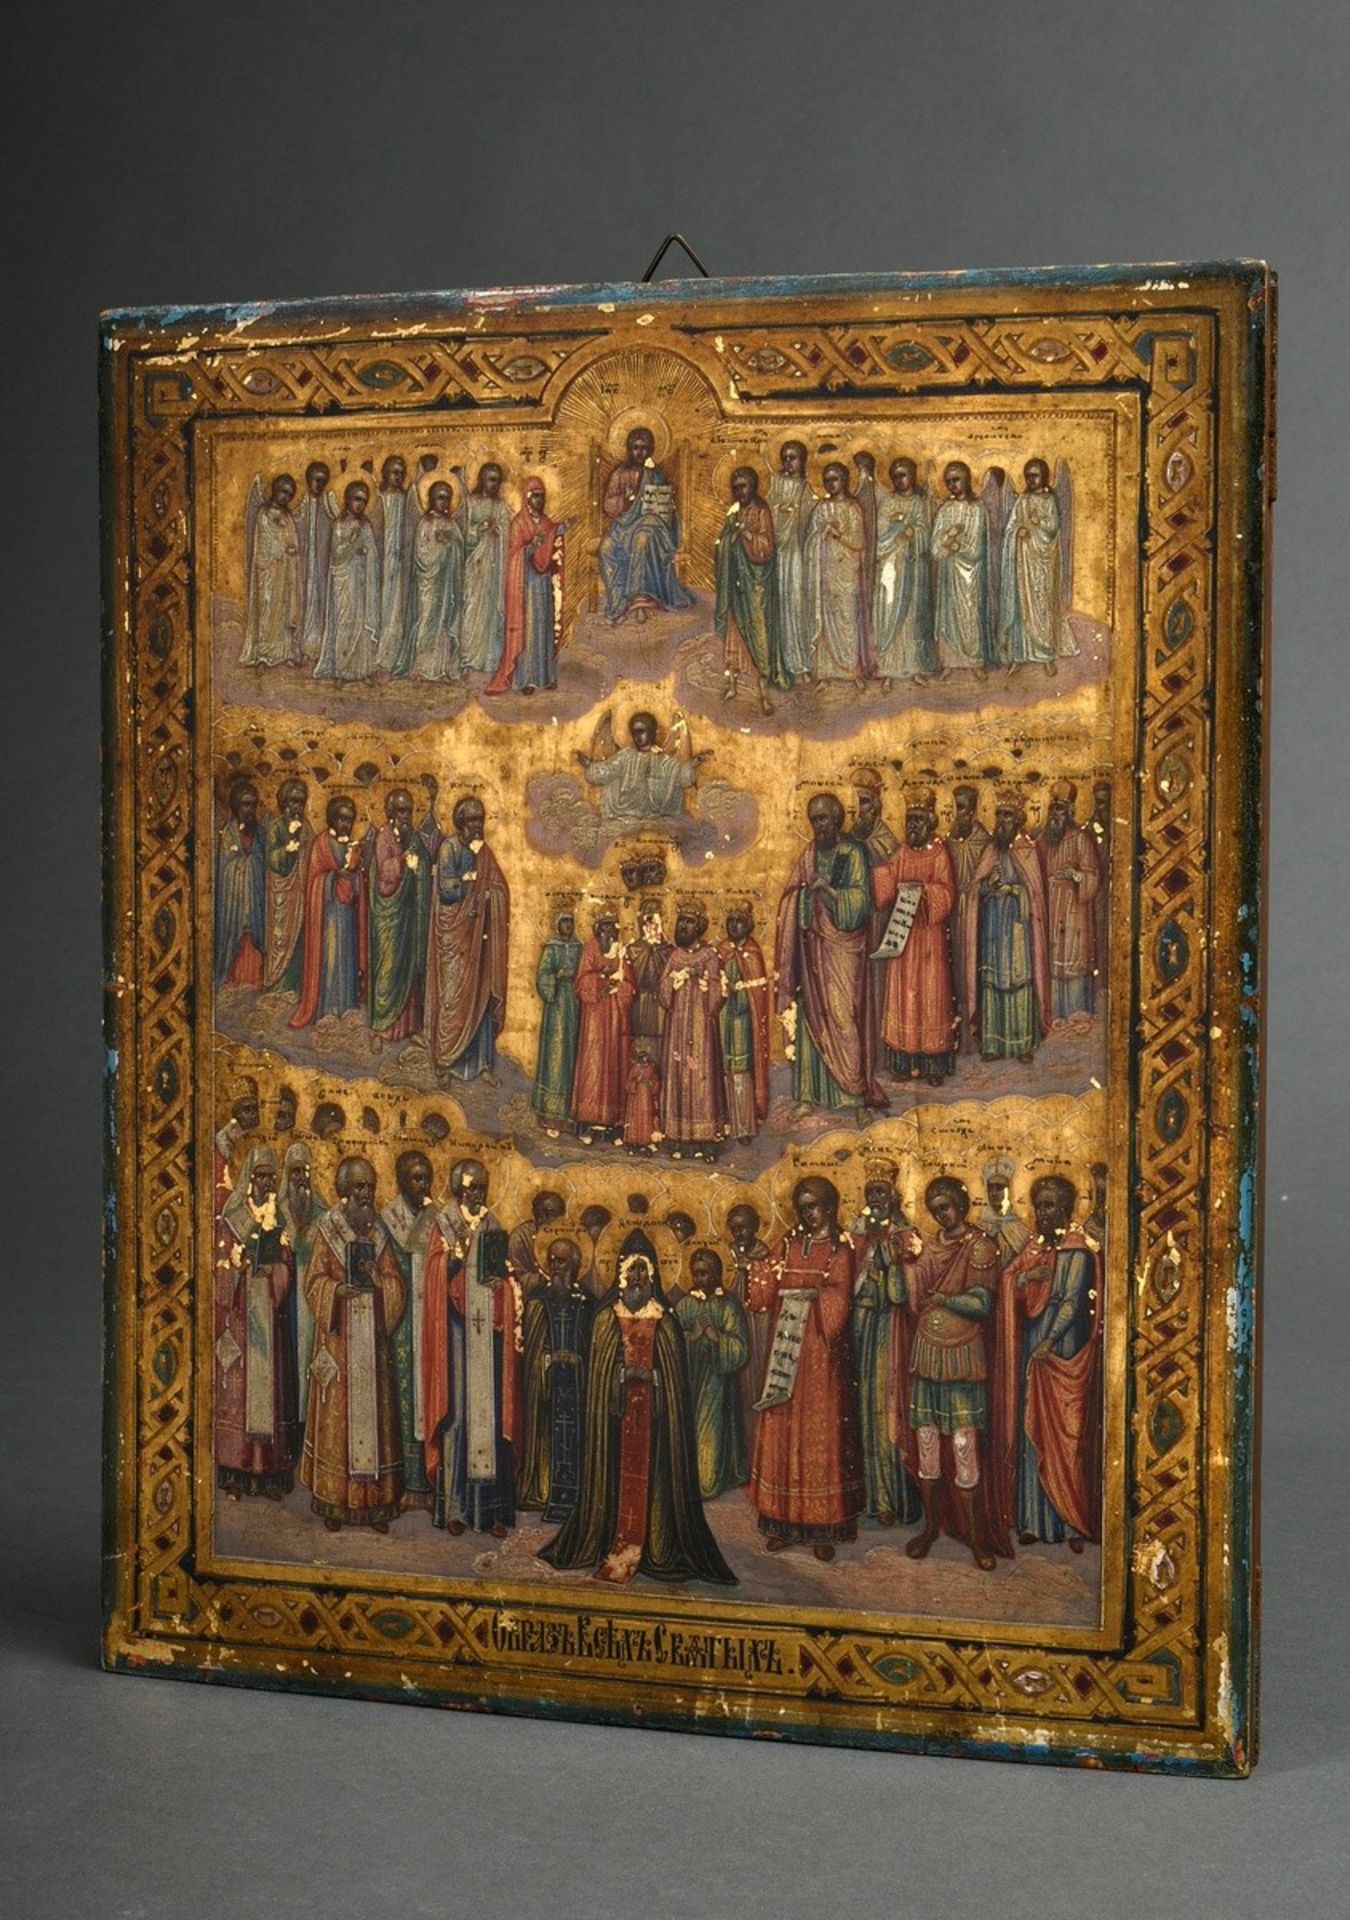 Russian icon "All Saints' Day" with ornamental border, egg tempera/chalk ground on wood, Russian in